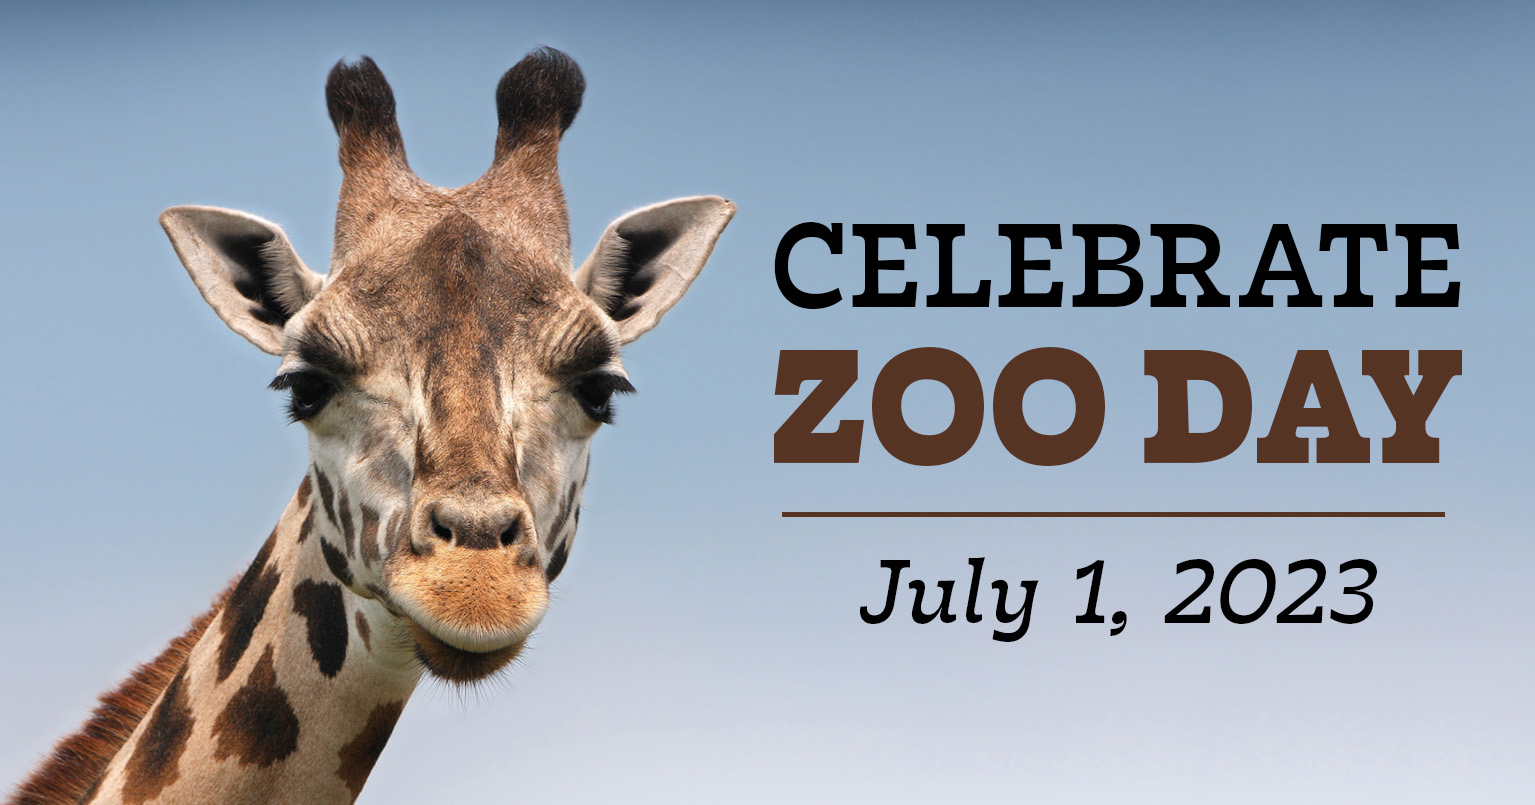 Celebrate wildlife education and enjoy time with the family on National Zoo Day